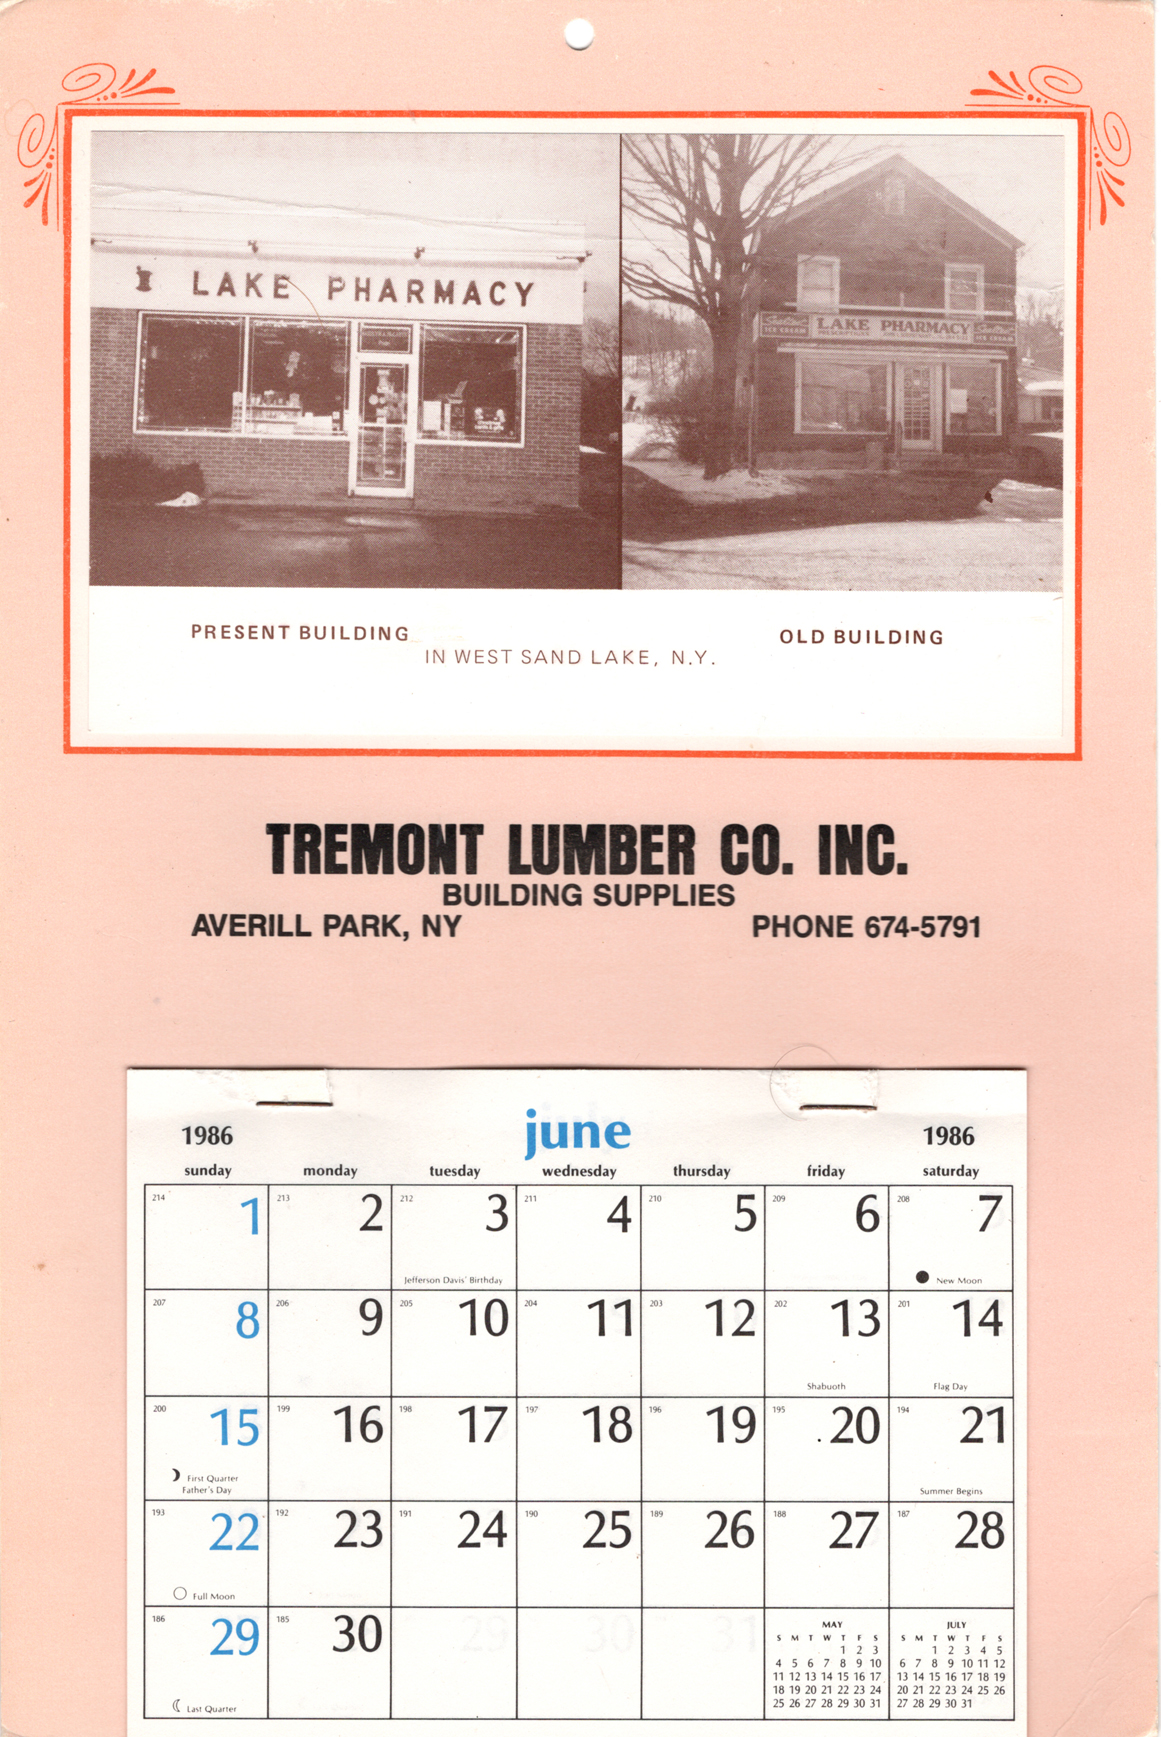 Tremont Lumber Company calendar from 1986.